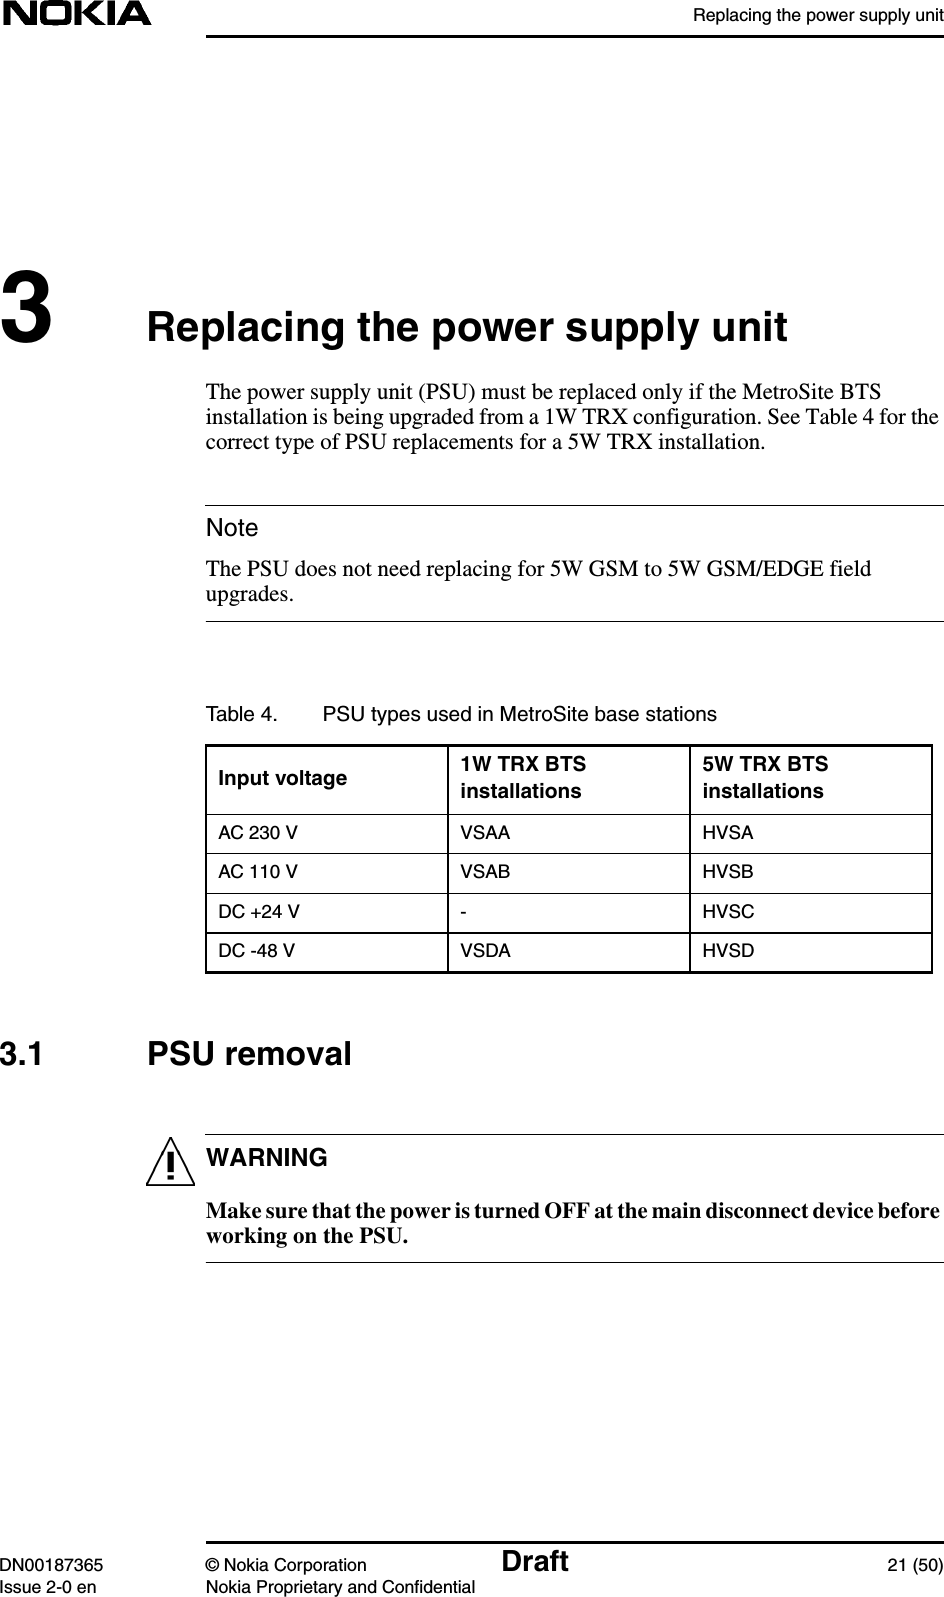 Replacing the power supply unitDN00187365 © Nokia Corporation Draft 21 (50)Issue 2-0 en Nokia Proprietary and ConfidentialNoteWARNING3Replacing the power supply unitThe power supply unit (PSU) must be replaced only if the MetroSite BTSinstallation is being upgraded from a 1W TRX configuration. See Table 4 for thecorrect type of PSU replacements for a 5W TRX installation.The PSU does not need replacing for 5W GSM to 5W GSM/EDGE fieldupgrades.3.1 PSU removalMake sure that the power is turned OFF at the main disconnect device beforeworking on the PSU.Table 4. PSU types used in MetroSite base stationsInput voltage 1W TRX BTSinstallations5W TRX BTSinstallationsAC 230 V VSAA HVSAAC 110 V VSAB HVSBDC +24 V - HVSCDC -48 V VSDA HVSD